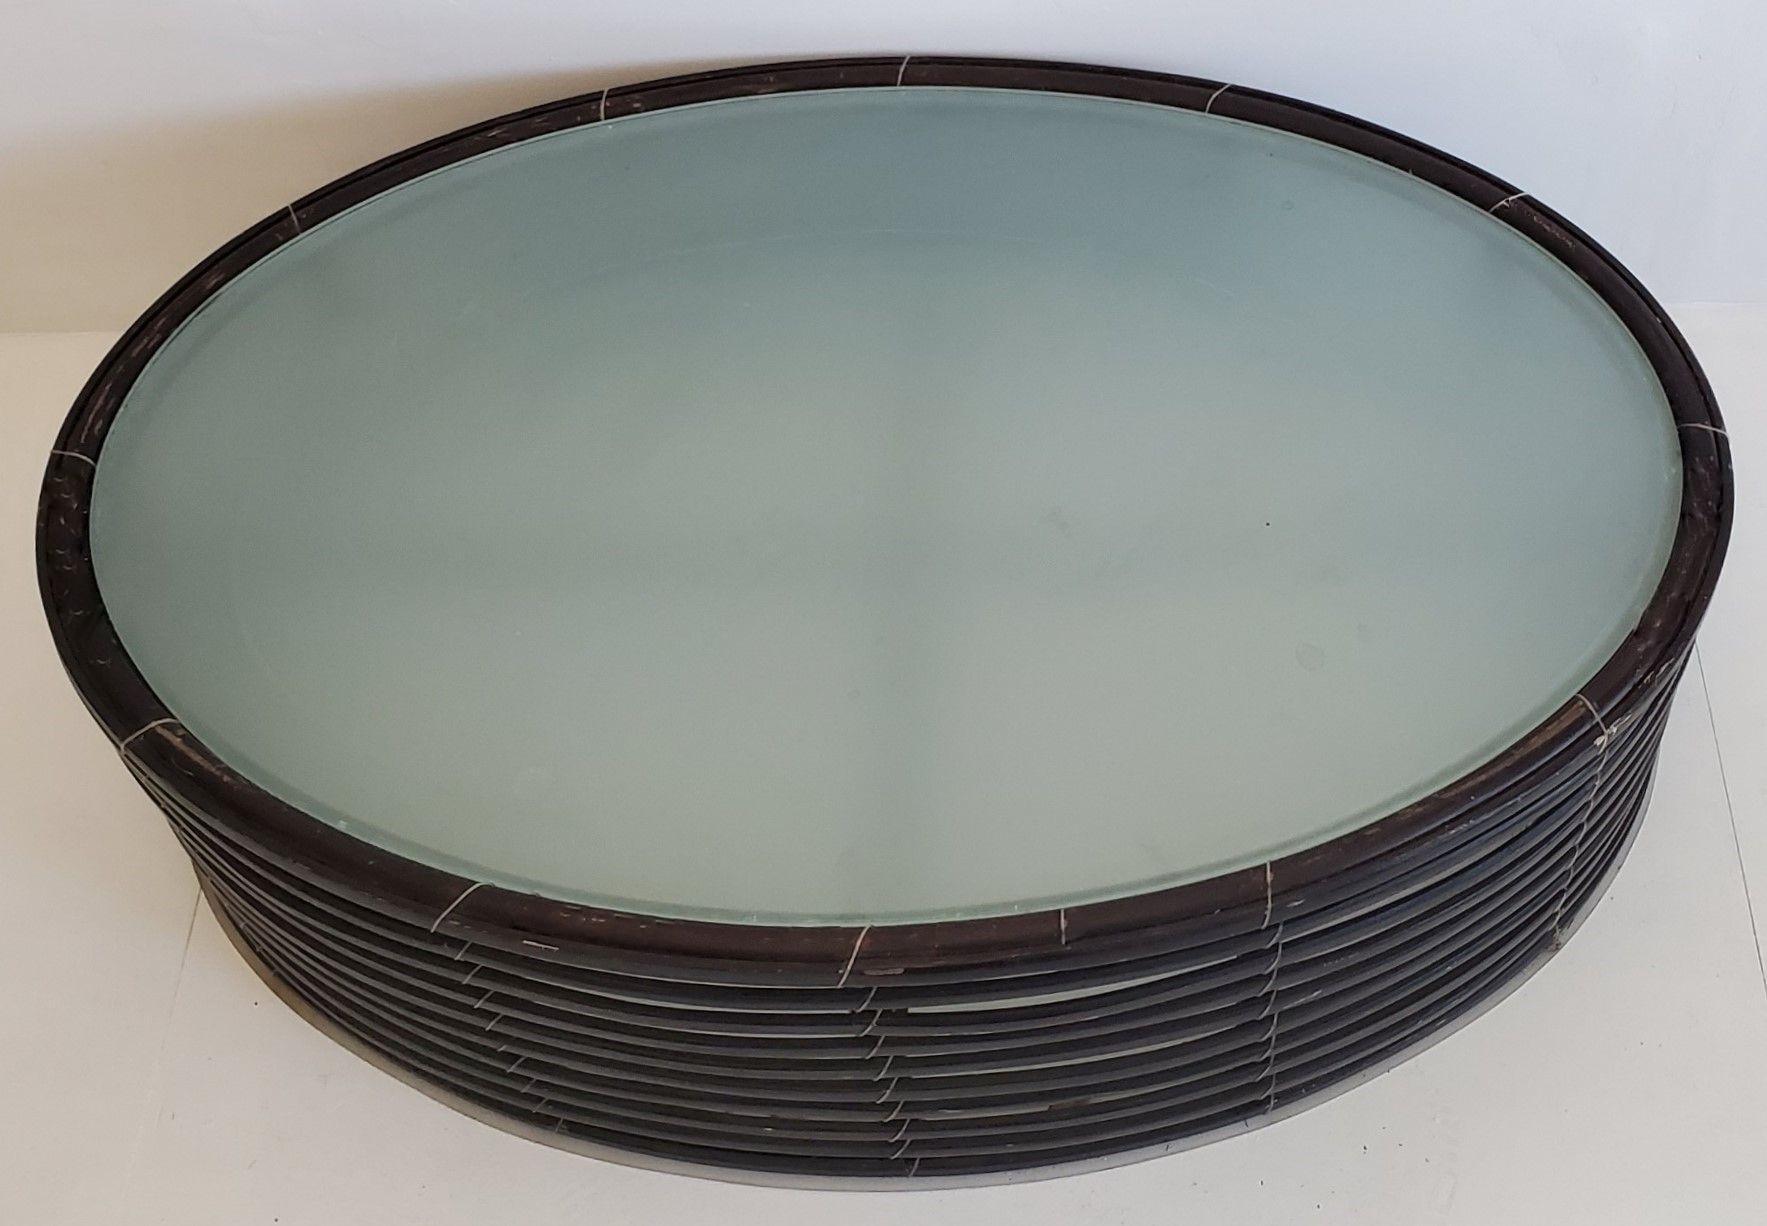 Lolah Kenneth Wood Medium Wood and Glass Coffee Table In Good Condition For Sale In Pasadena, CA